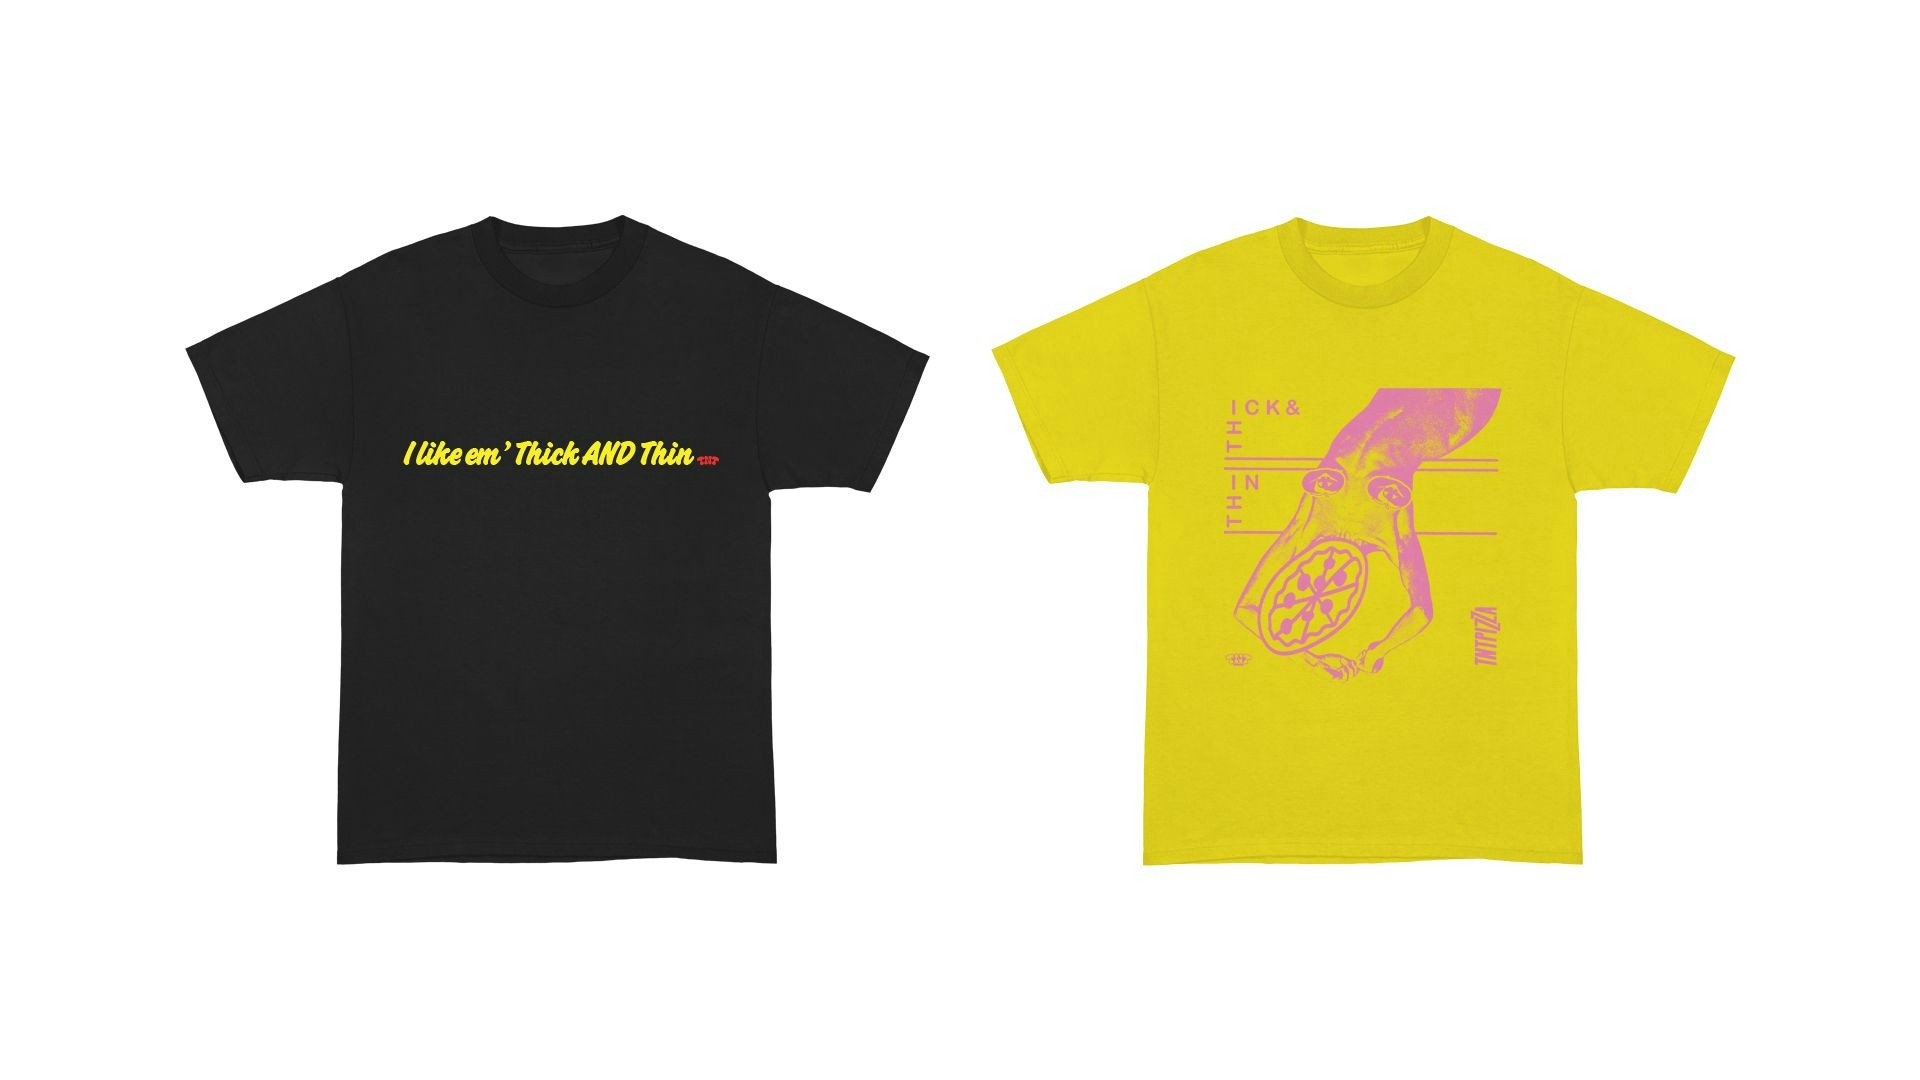 TNT Pizza black and yellow graphic tees from the Brand Identity & Packaging project